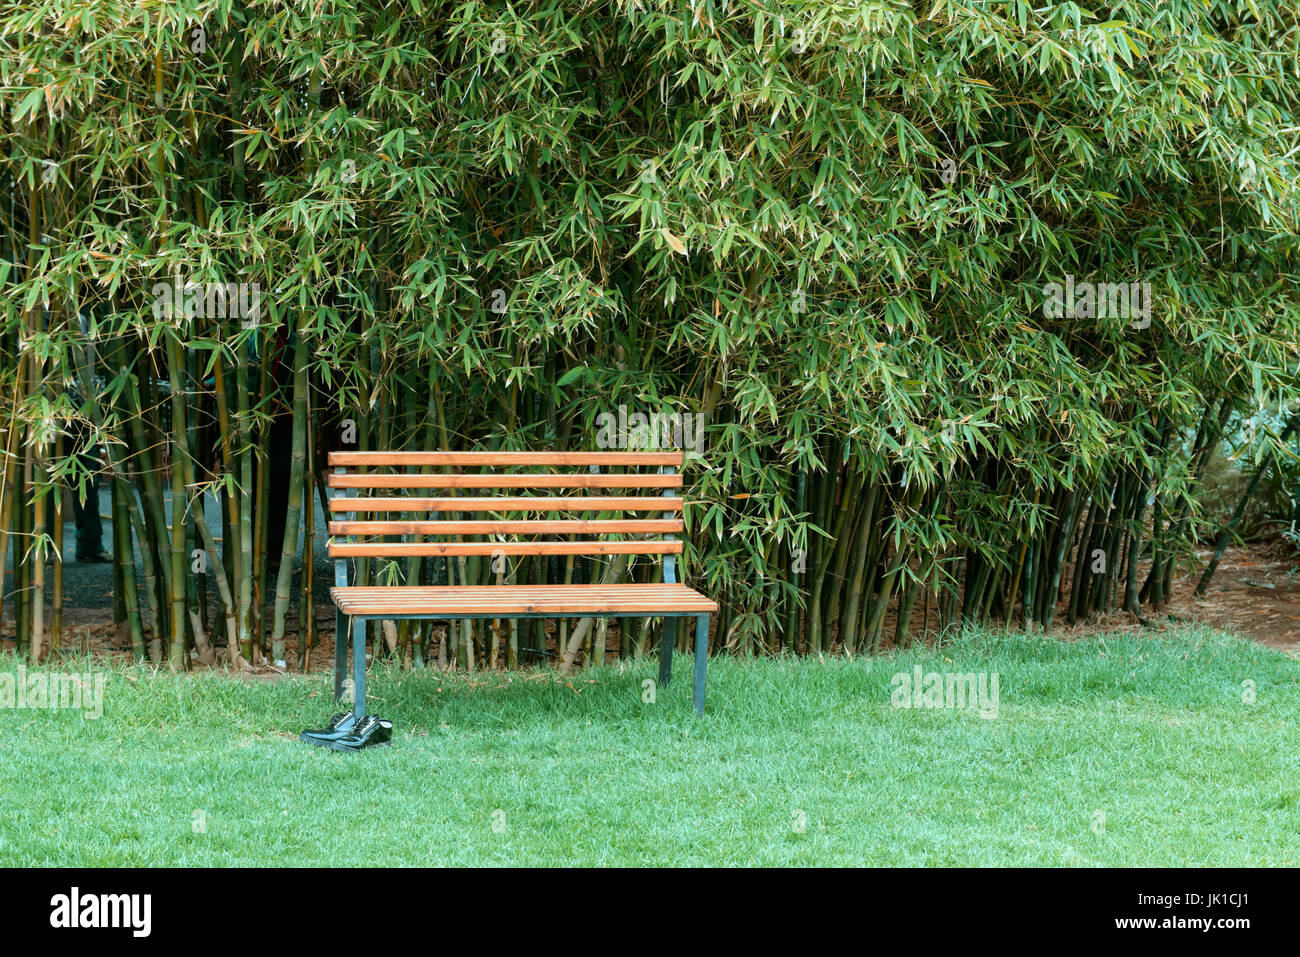 A wooden bench and black shoes against bamboo background. Stock Photo